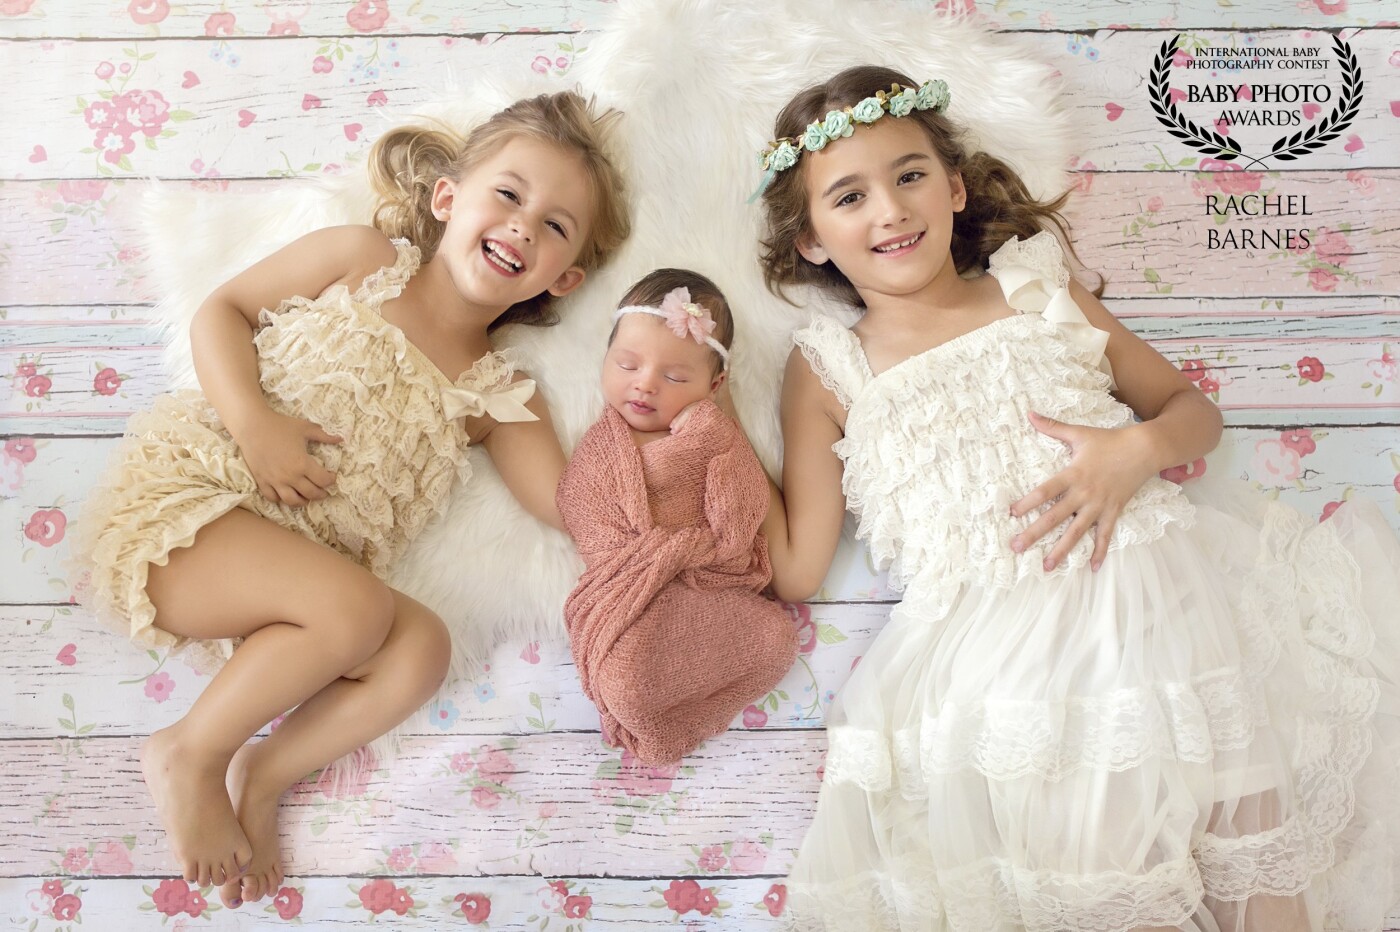 "Girls are made of sugar and spice, everything sweet and everything nice! Girls are ruffles, bonnets and bow, dimpled smiles and dancing toes! They're tears and giggles, dolls and curls, thats how it is with little girls!" <br />
